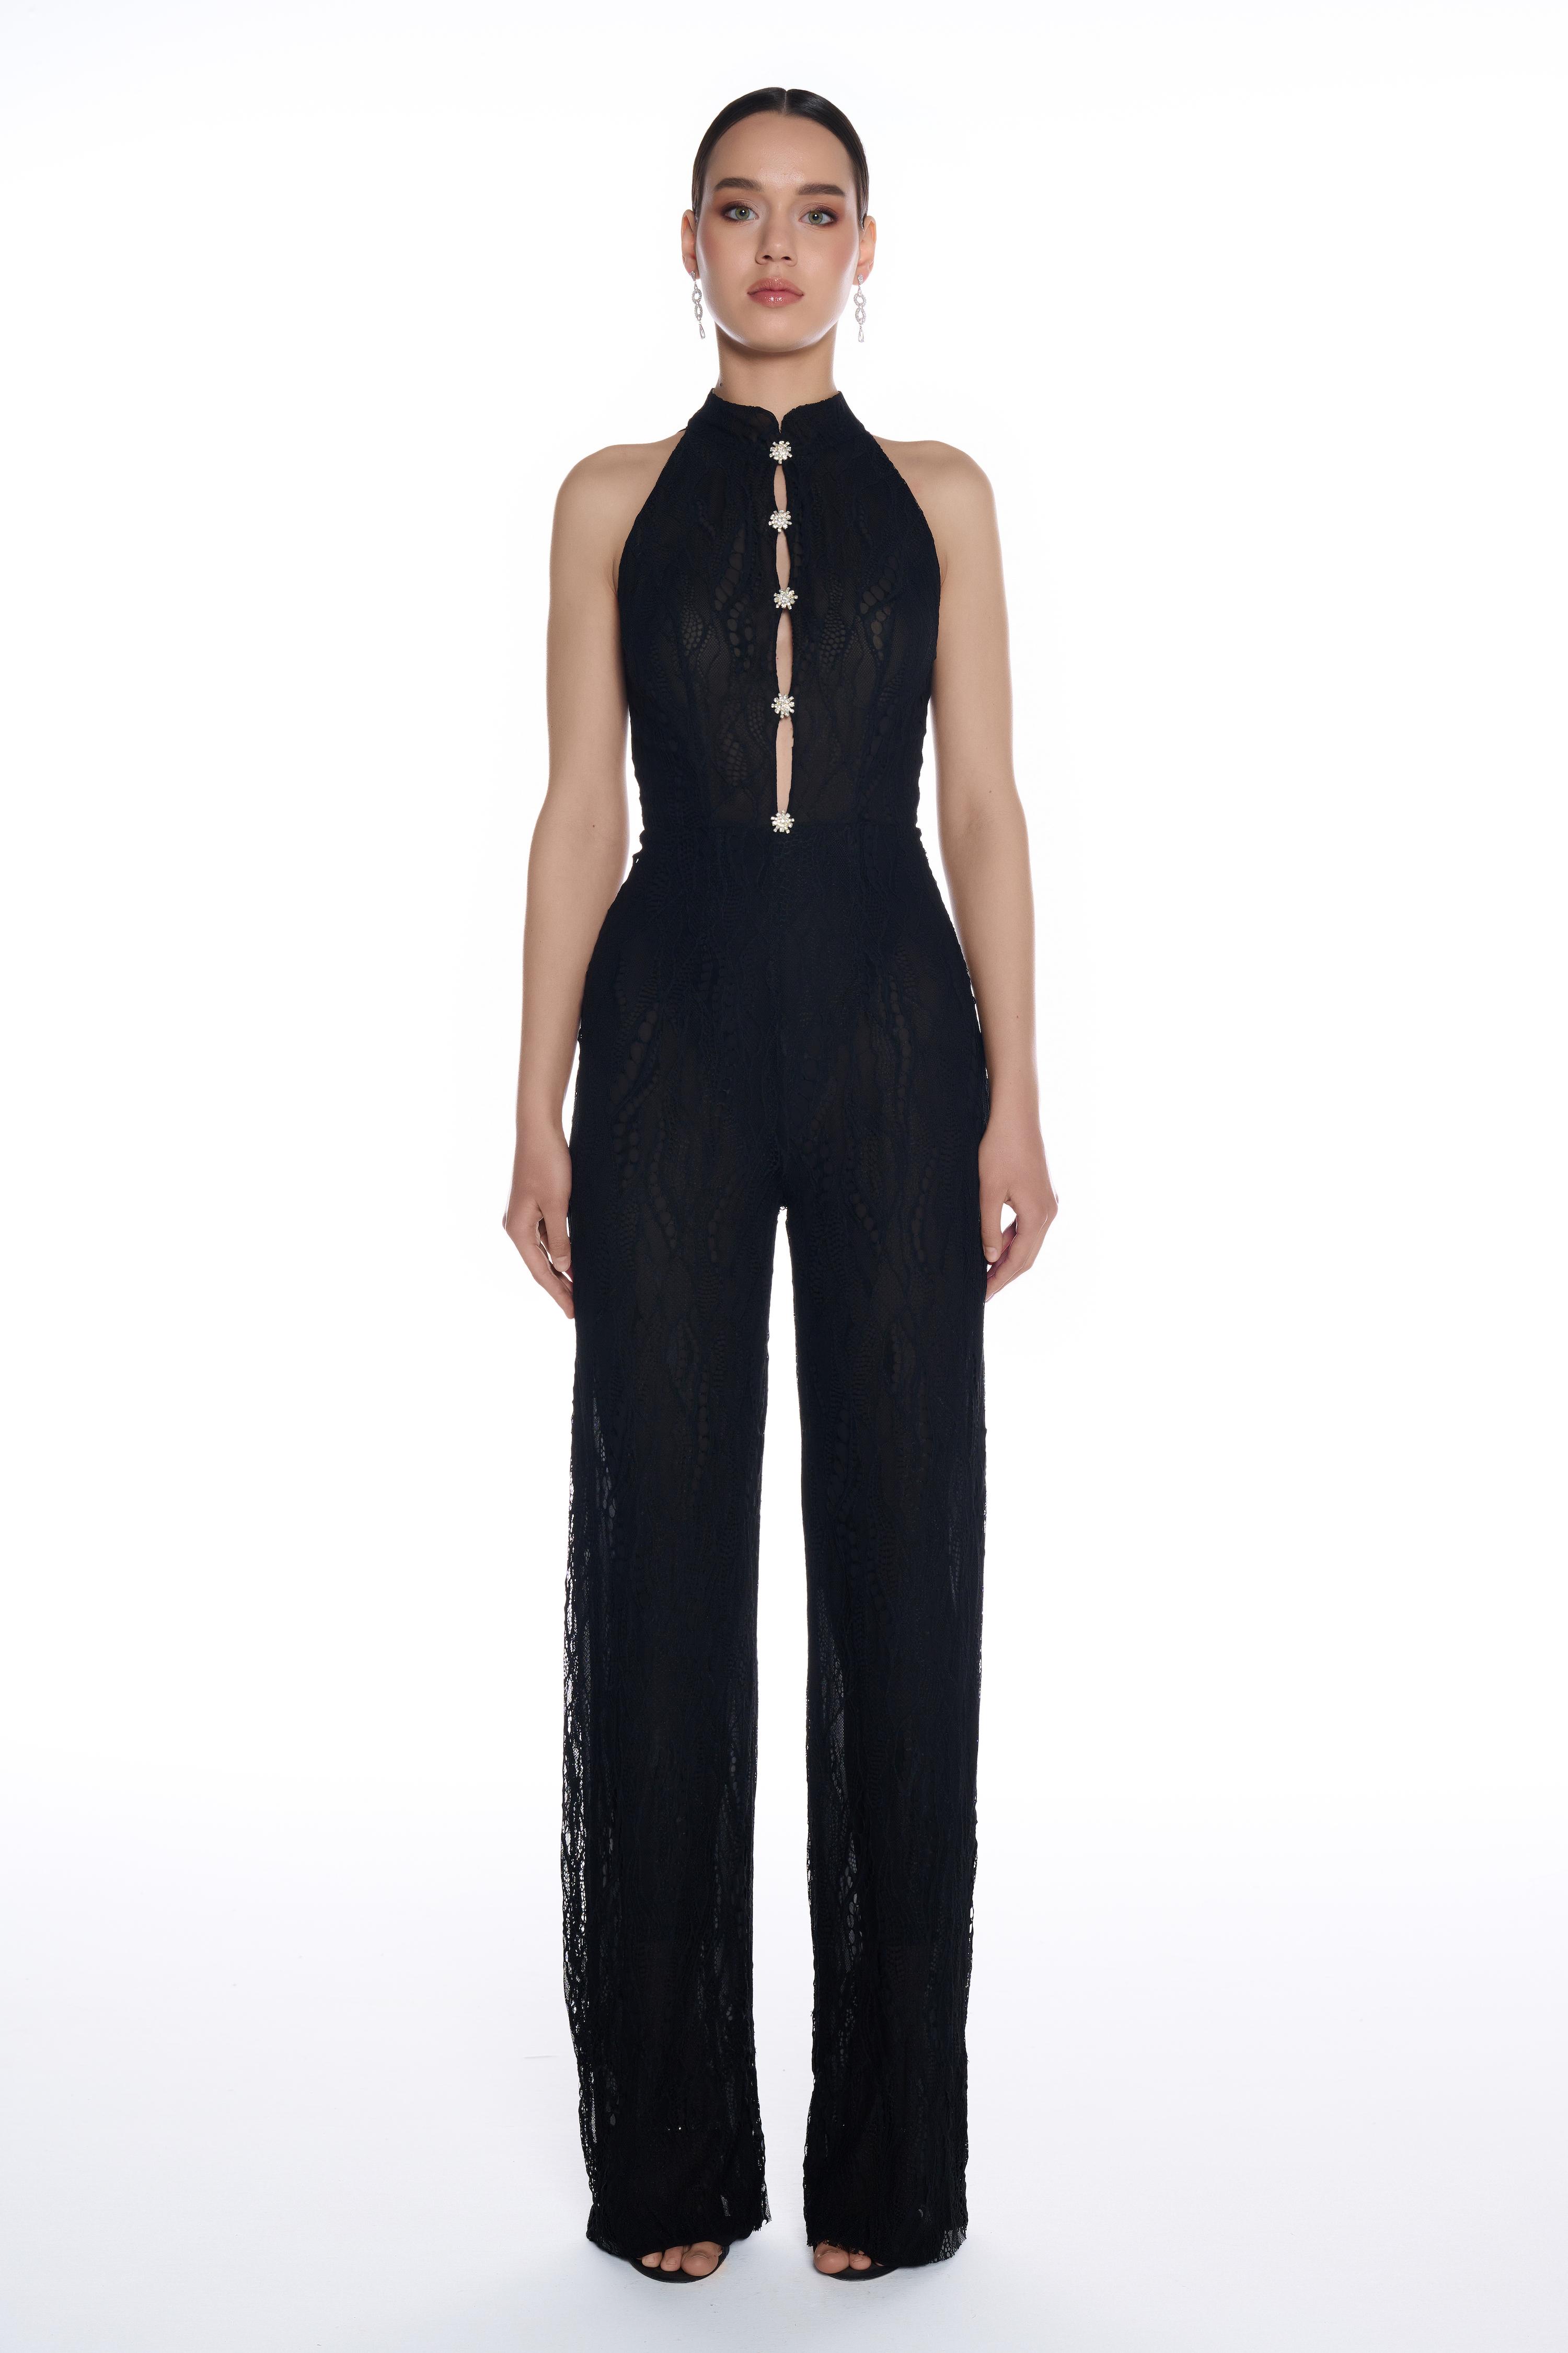 R12 - Mandarin Collar, Halter Shoulders, Front Keyhole with Drop Detail, Stone Button Accents, All Over Lace, Jumpsuit